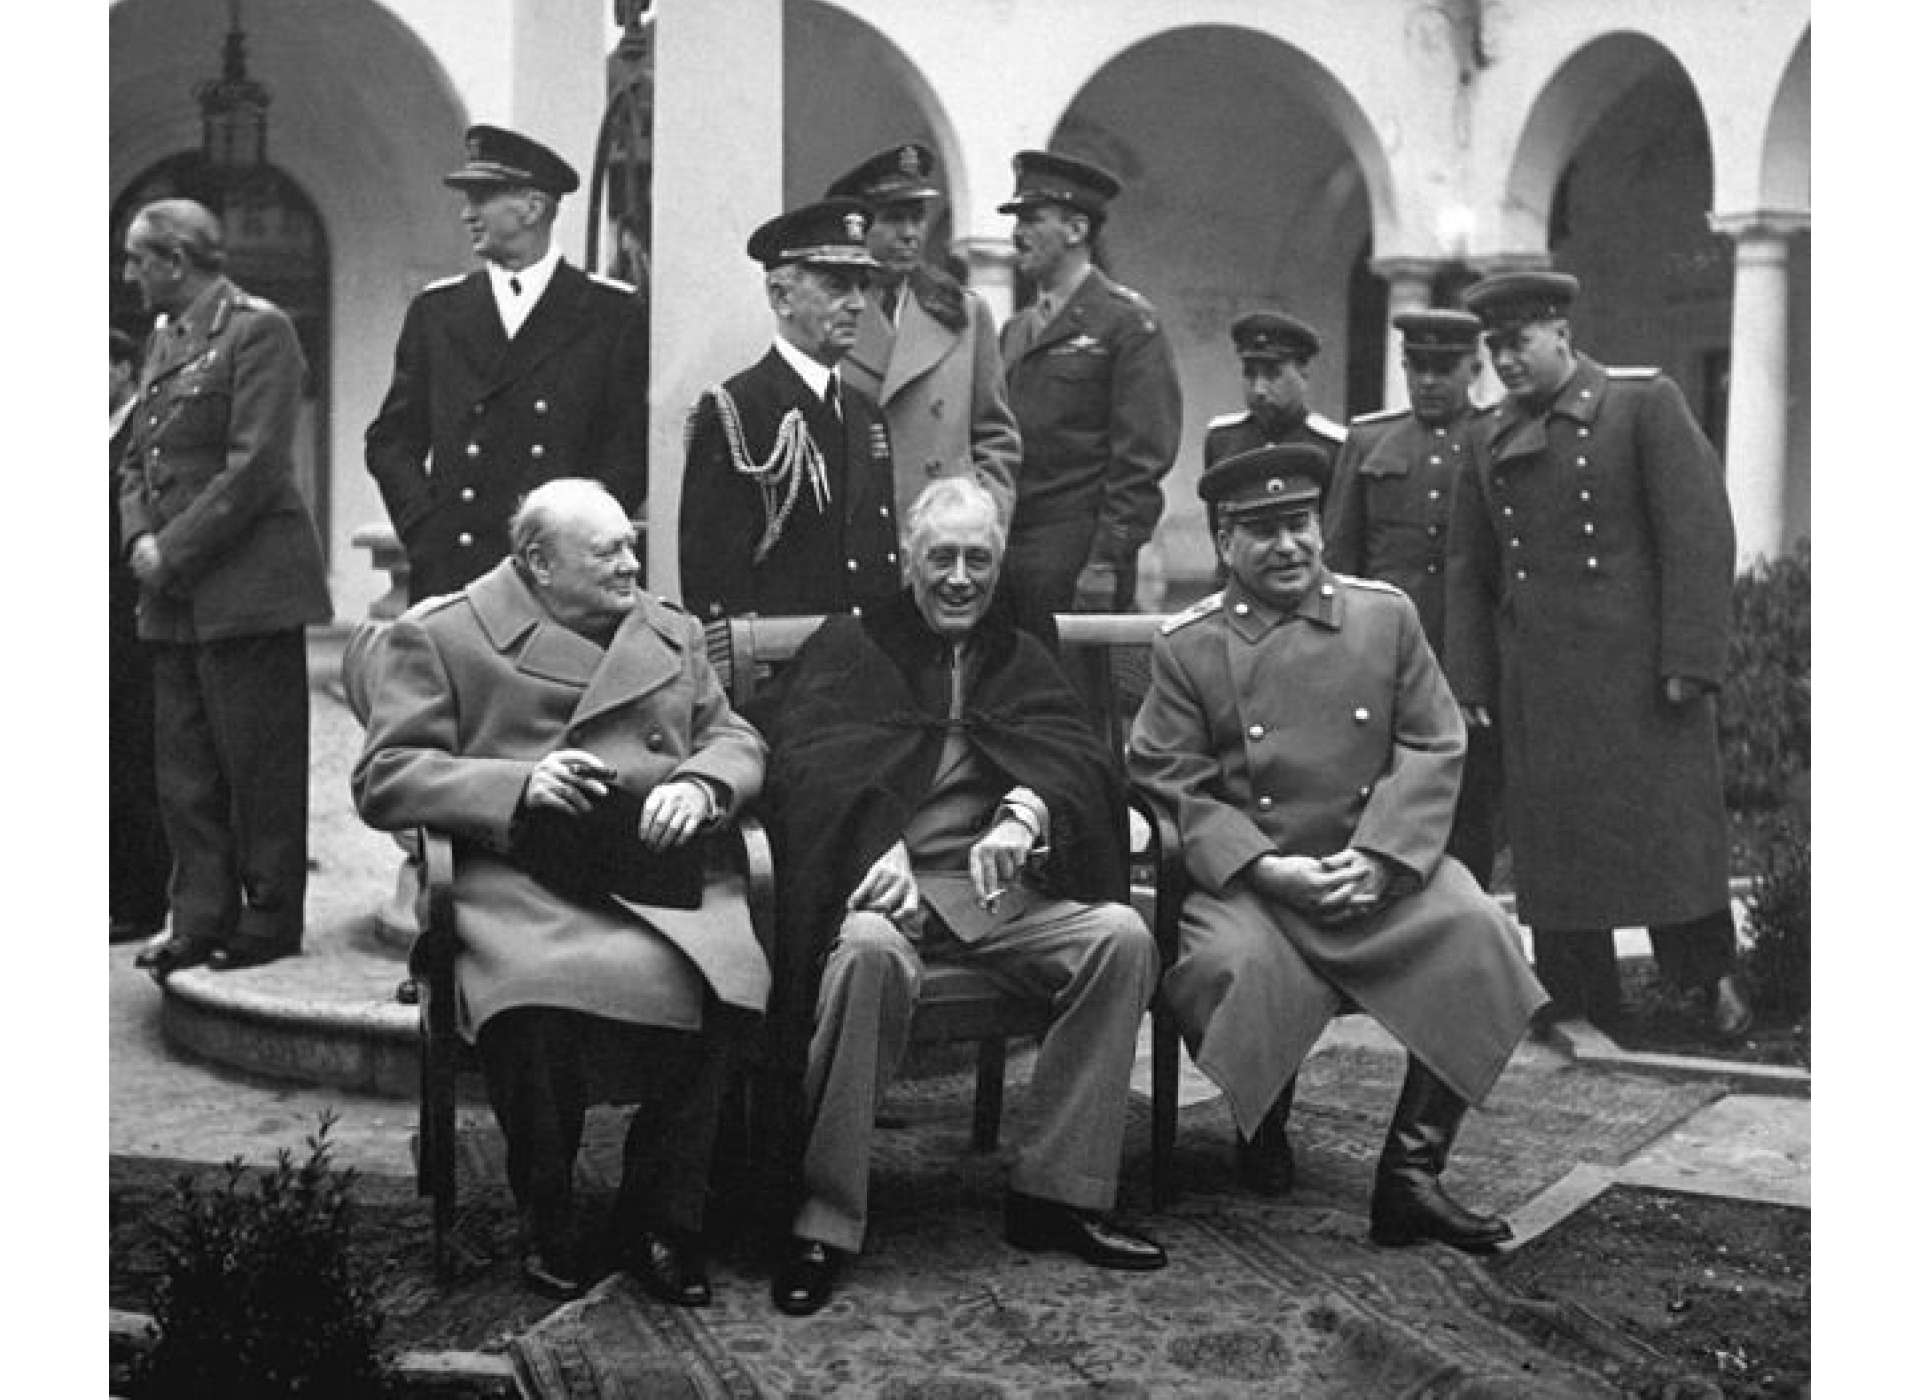 British Prime Minister Winston Churchill, U.S. President Franklin D. Roosevelt, and Soviet Premier Joseph Stalin pose outside on the grounds of the Livadia Palace during the Yalta Conference. “Yalta Conference, February 4, 1945, Yalta, Ukraine, United States Holocaust Memorial Museum, courtesy of National Archives and Records Administration, College Park, Photograph Number: 91461.